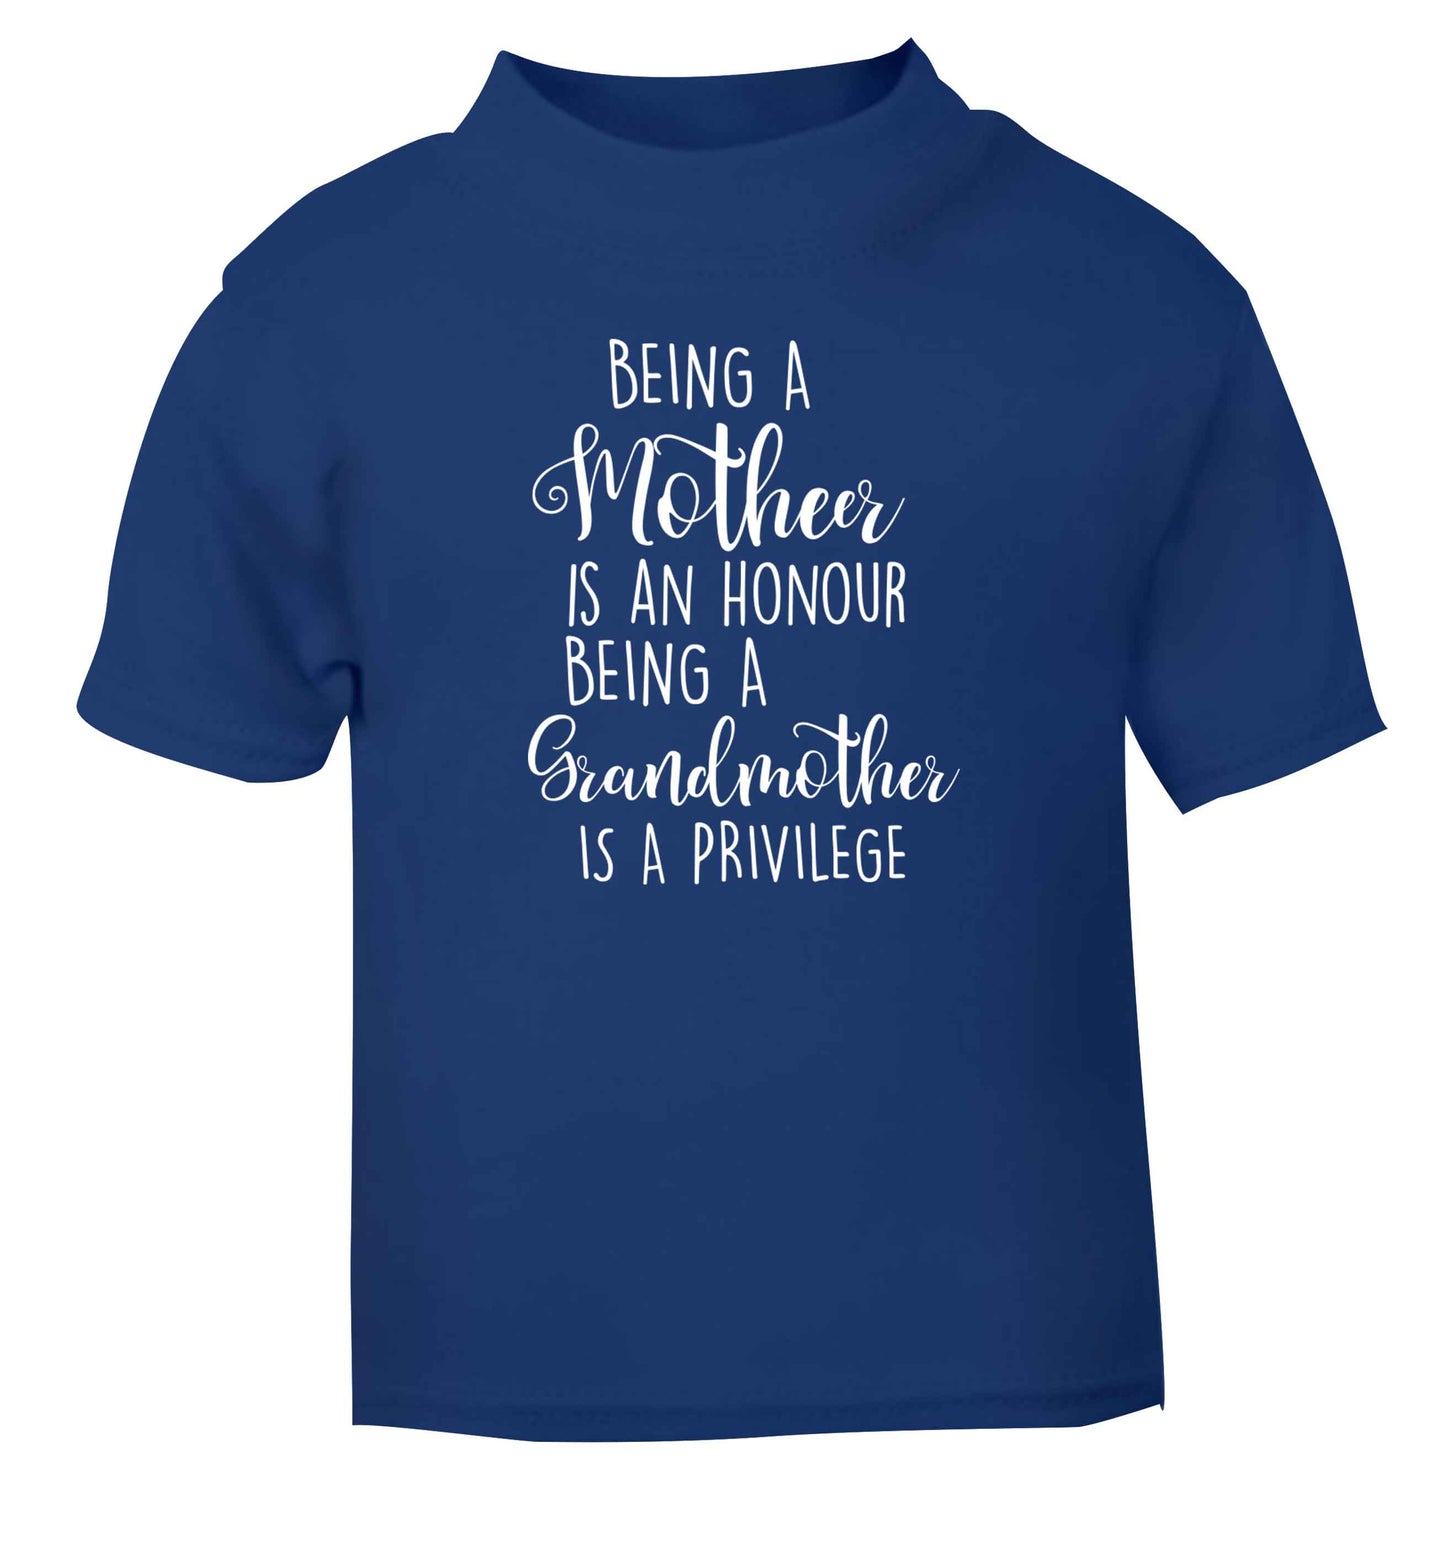 Being a mother is an honour being an grandmother is a privilege blue Baby Toddler Tshirt 2 Years